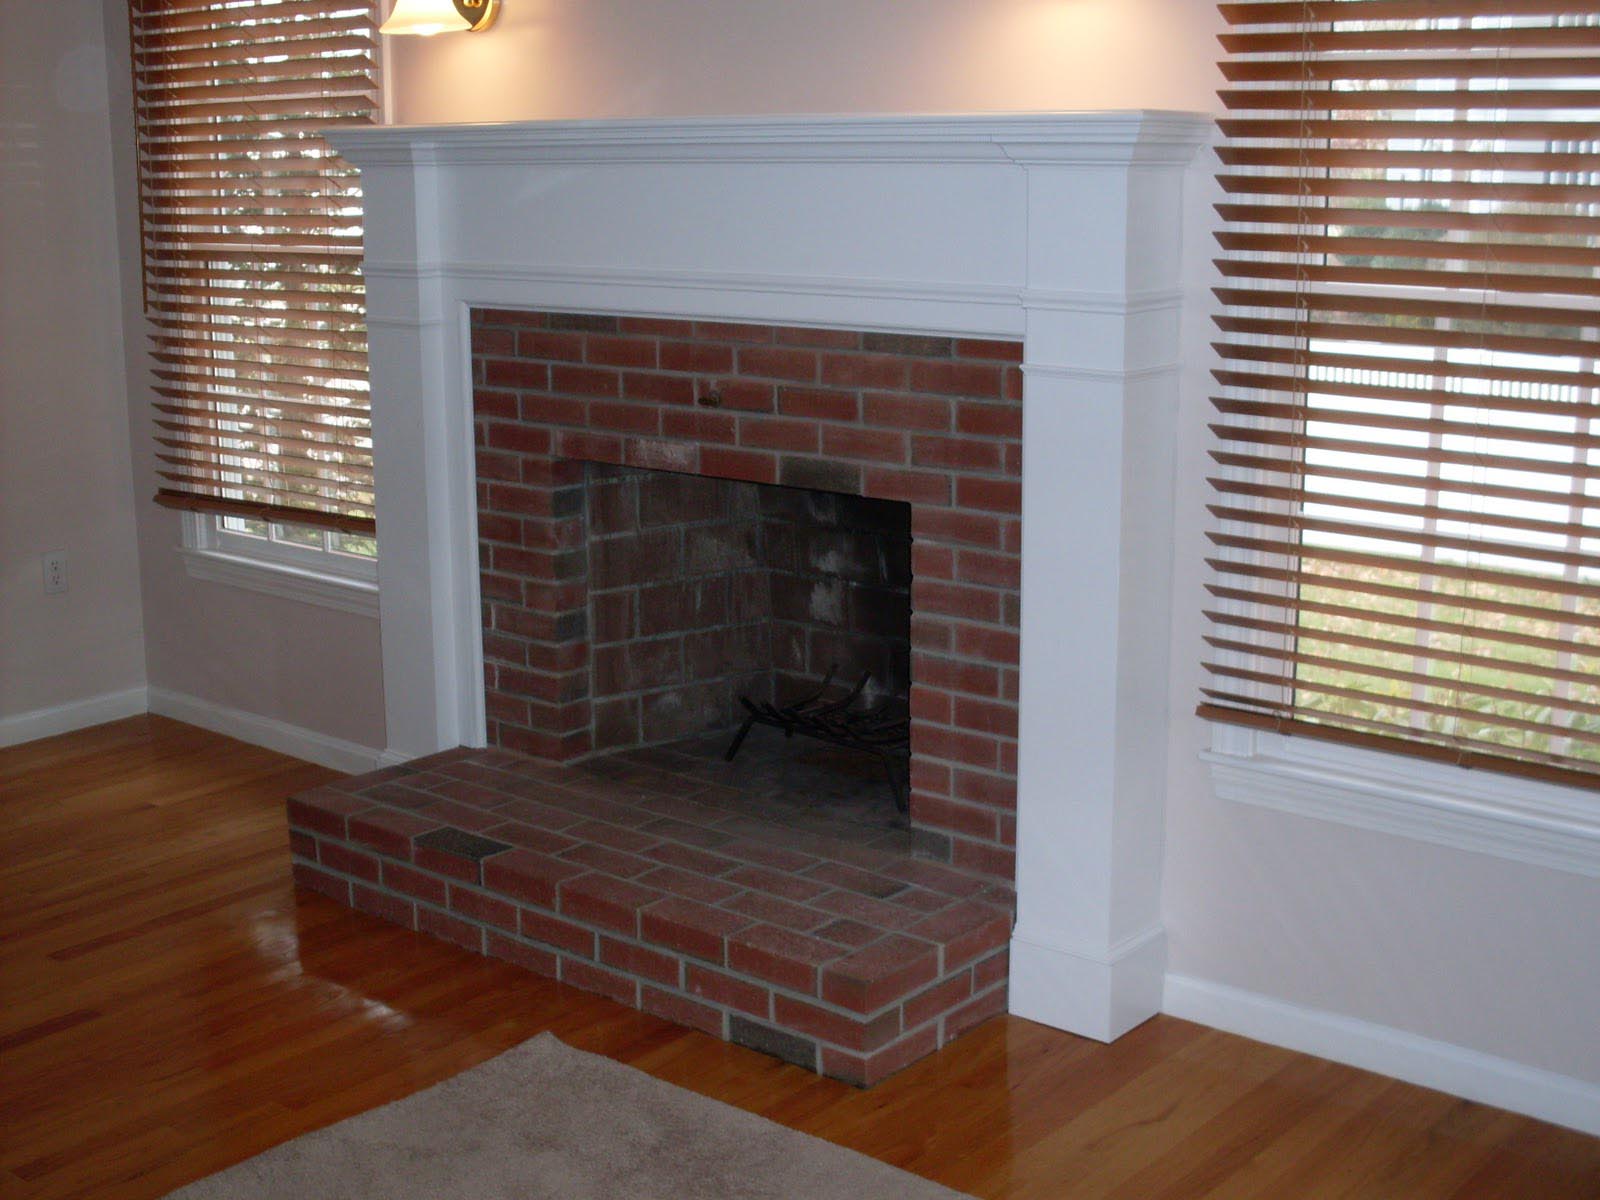 How to Build a Fireplace Surround for a Gas Fireplace